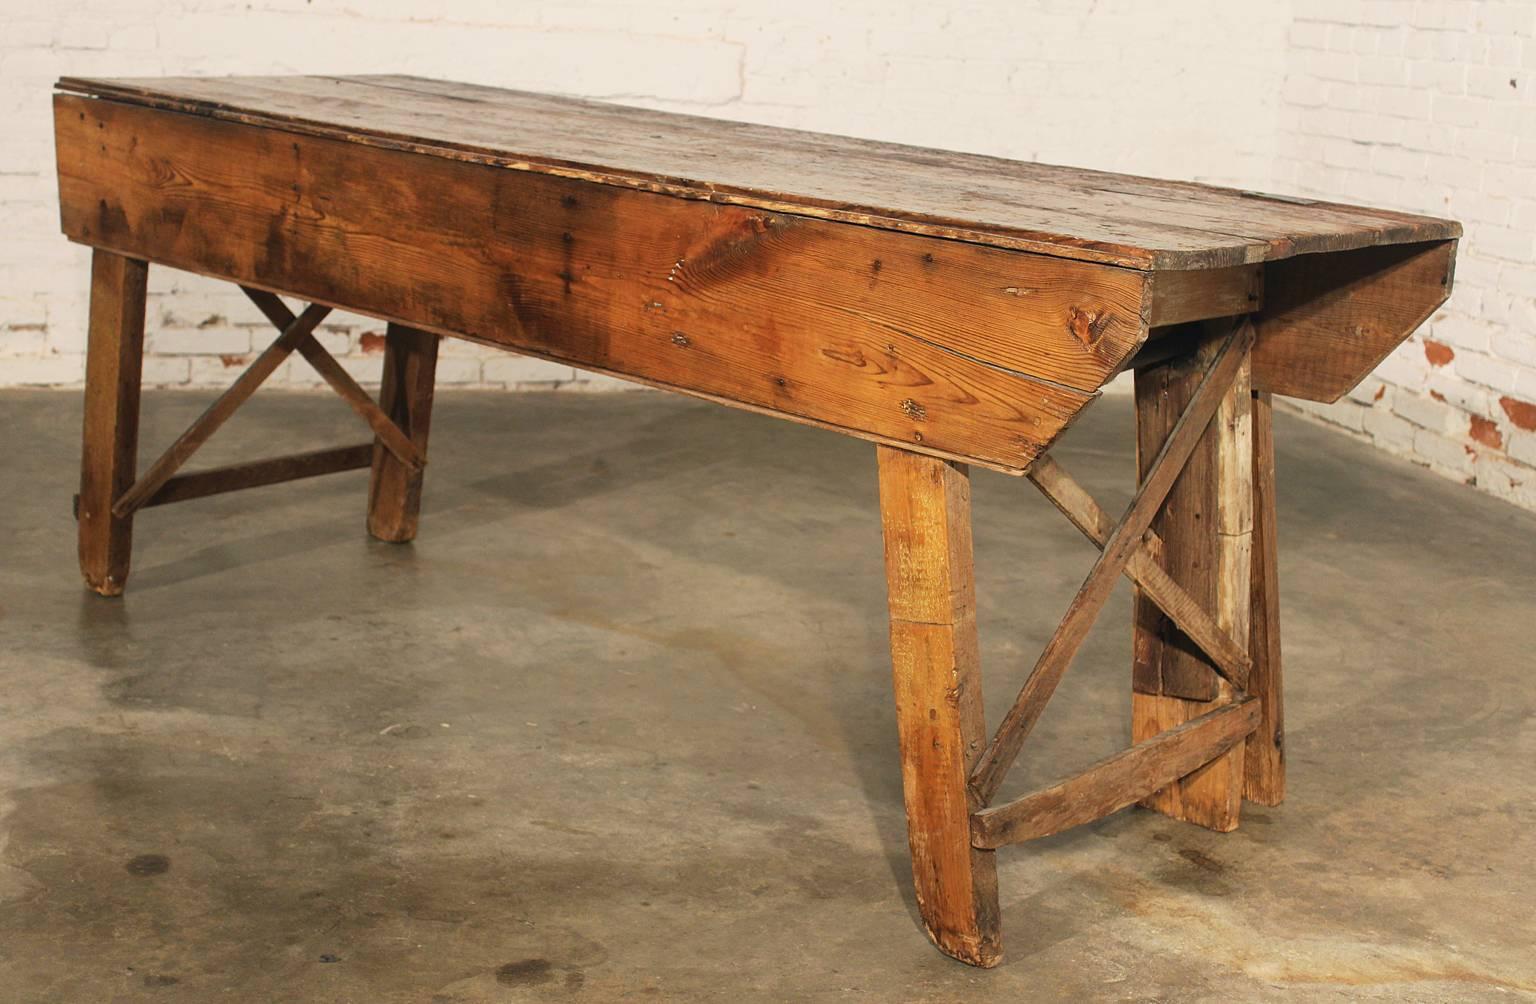 Primitive Industrial Farmhouse Style Dining Table Workbench with Wood Vise Leg 1